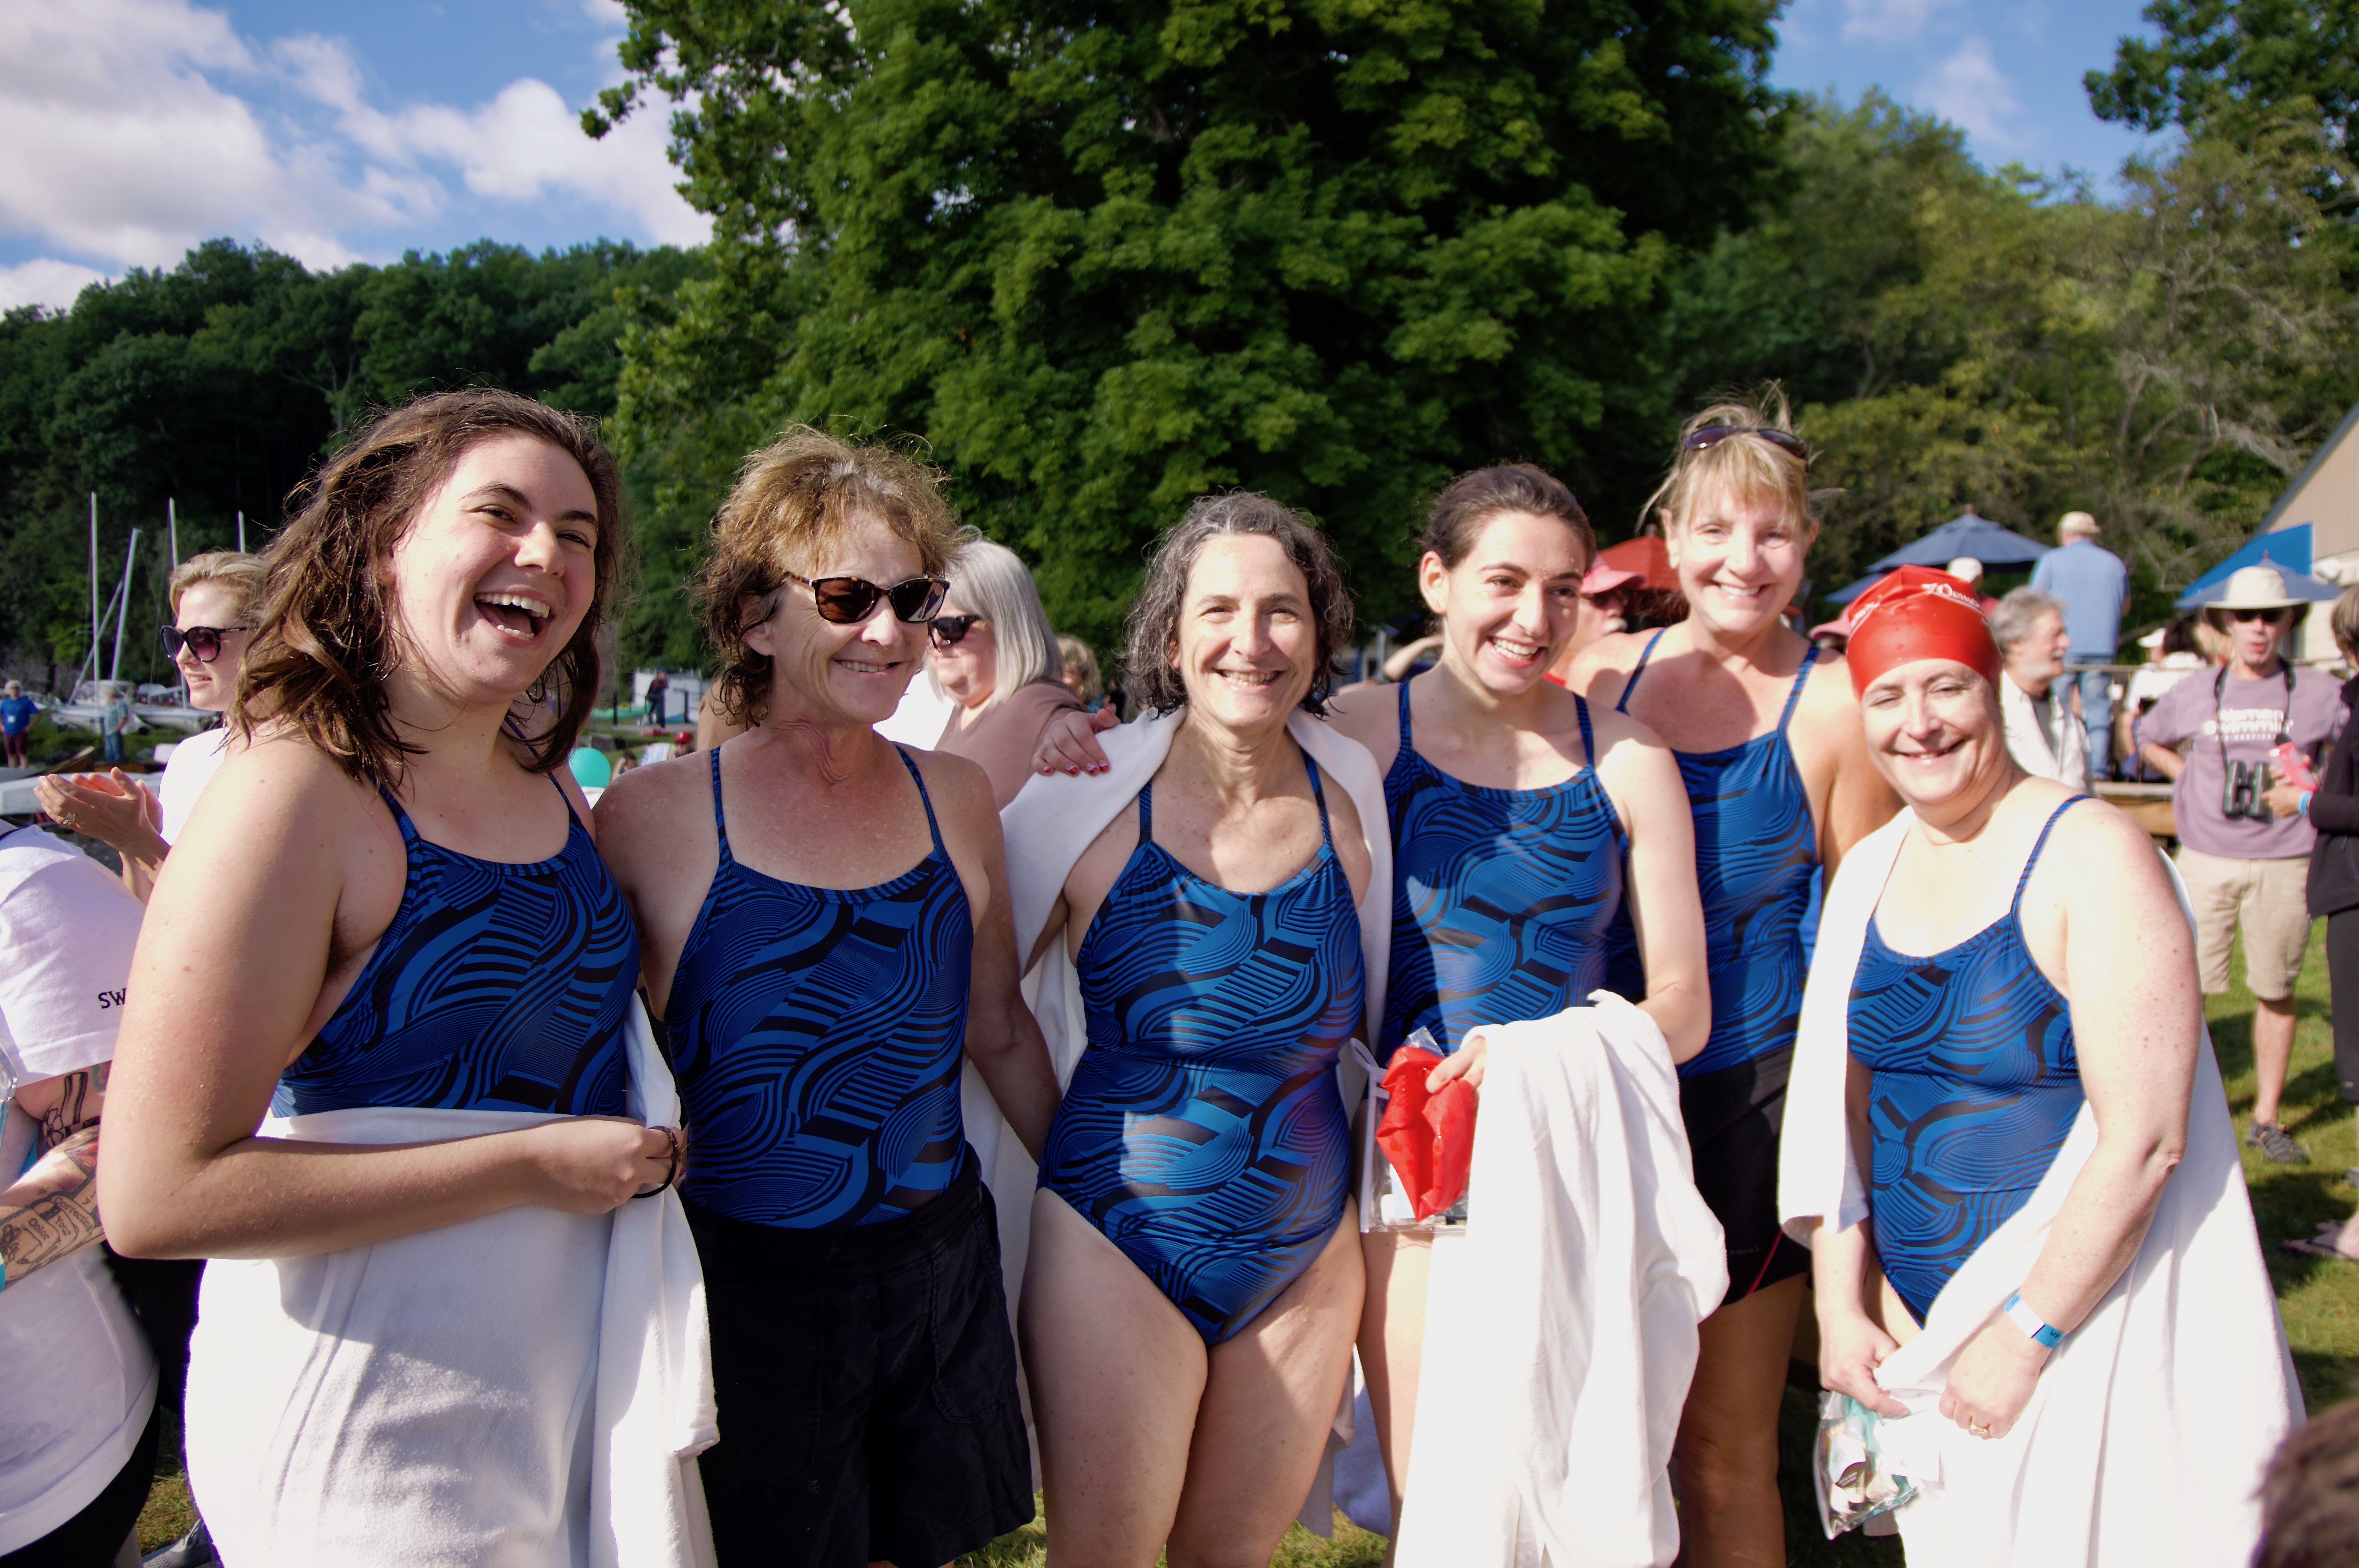 Six women wearing matching blue patterned one-piece swimsuits and holding towels and clothing smiling at the camera. A crowd of people are in the background. 